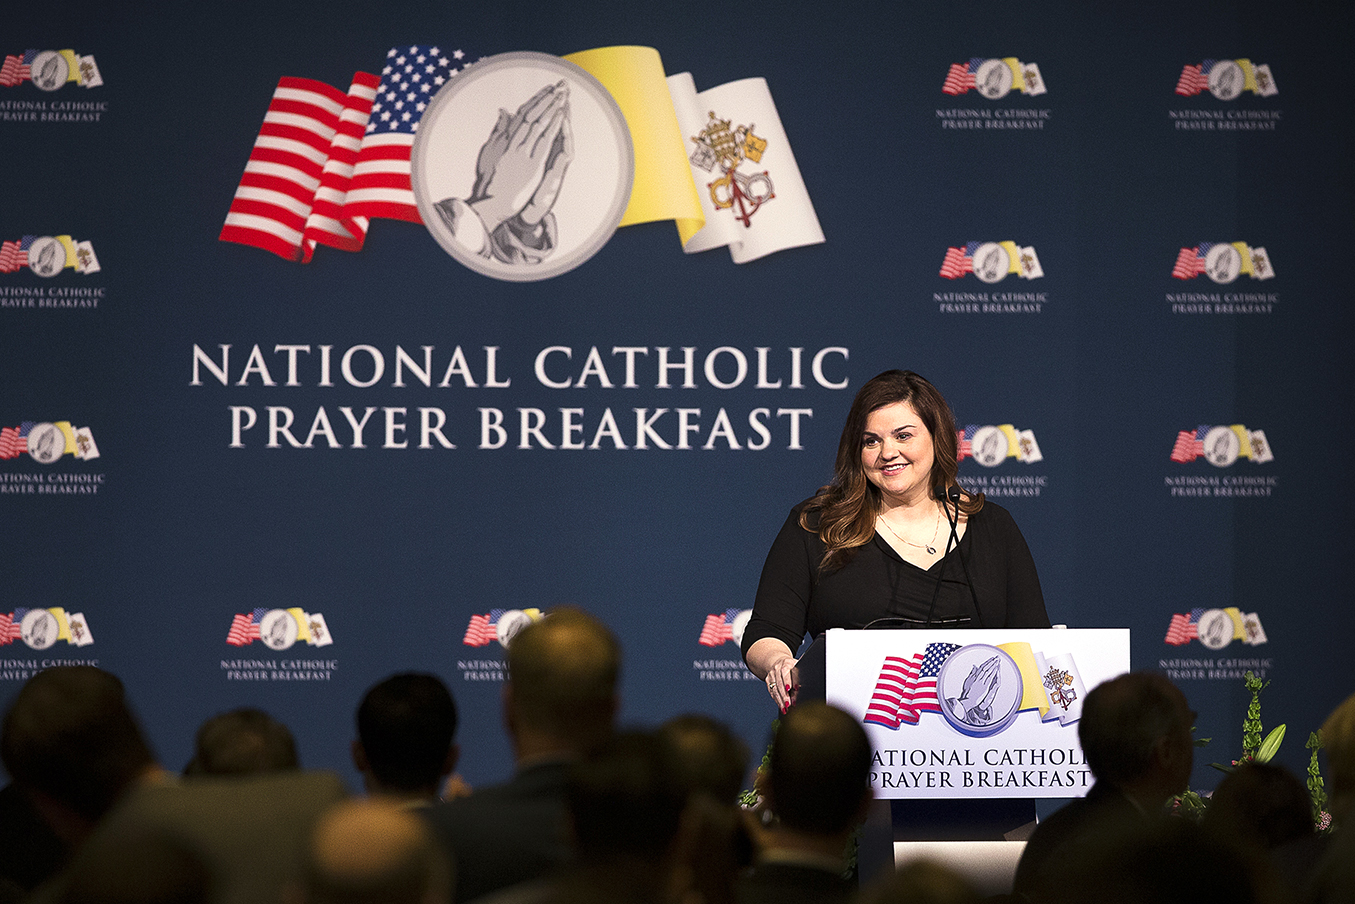 Go forth and be warriors for life, pro-life advocate Abby Johnson tells  those attending 43rd annual Respect Life Convention, Articles